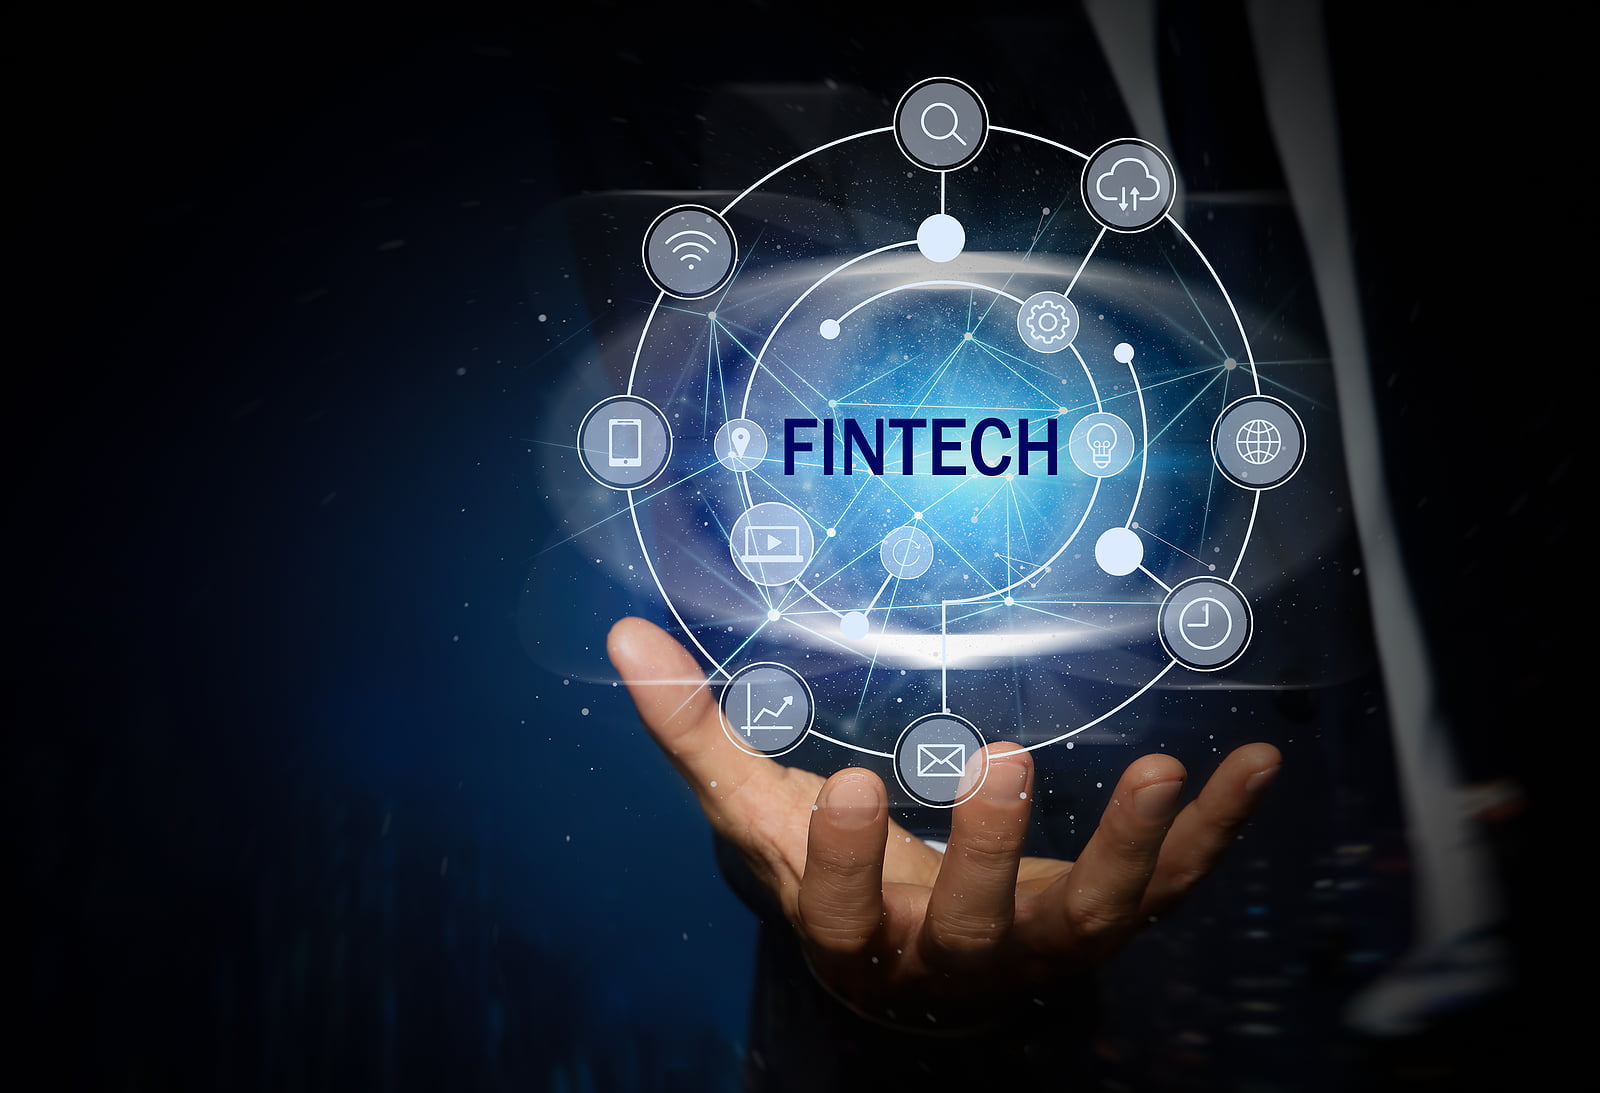 Here are the top ten fintech trends in recent research.